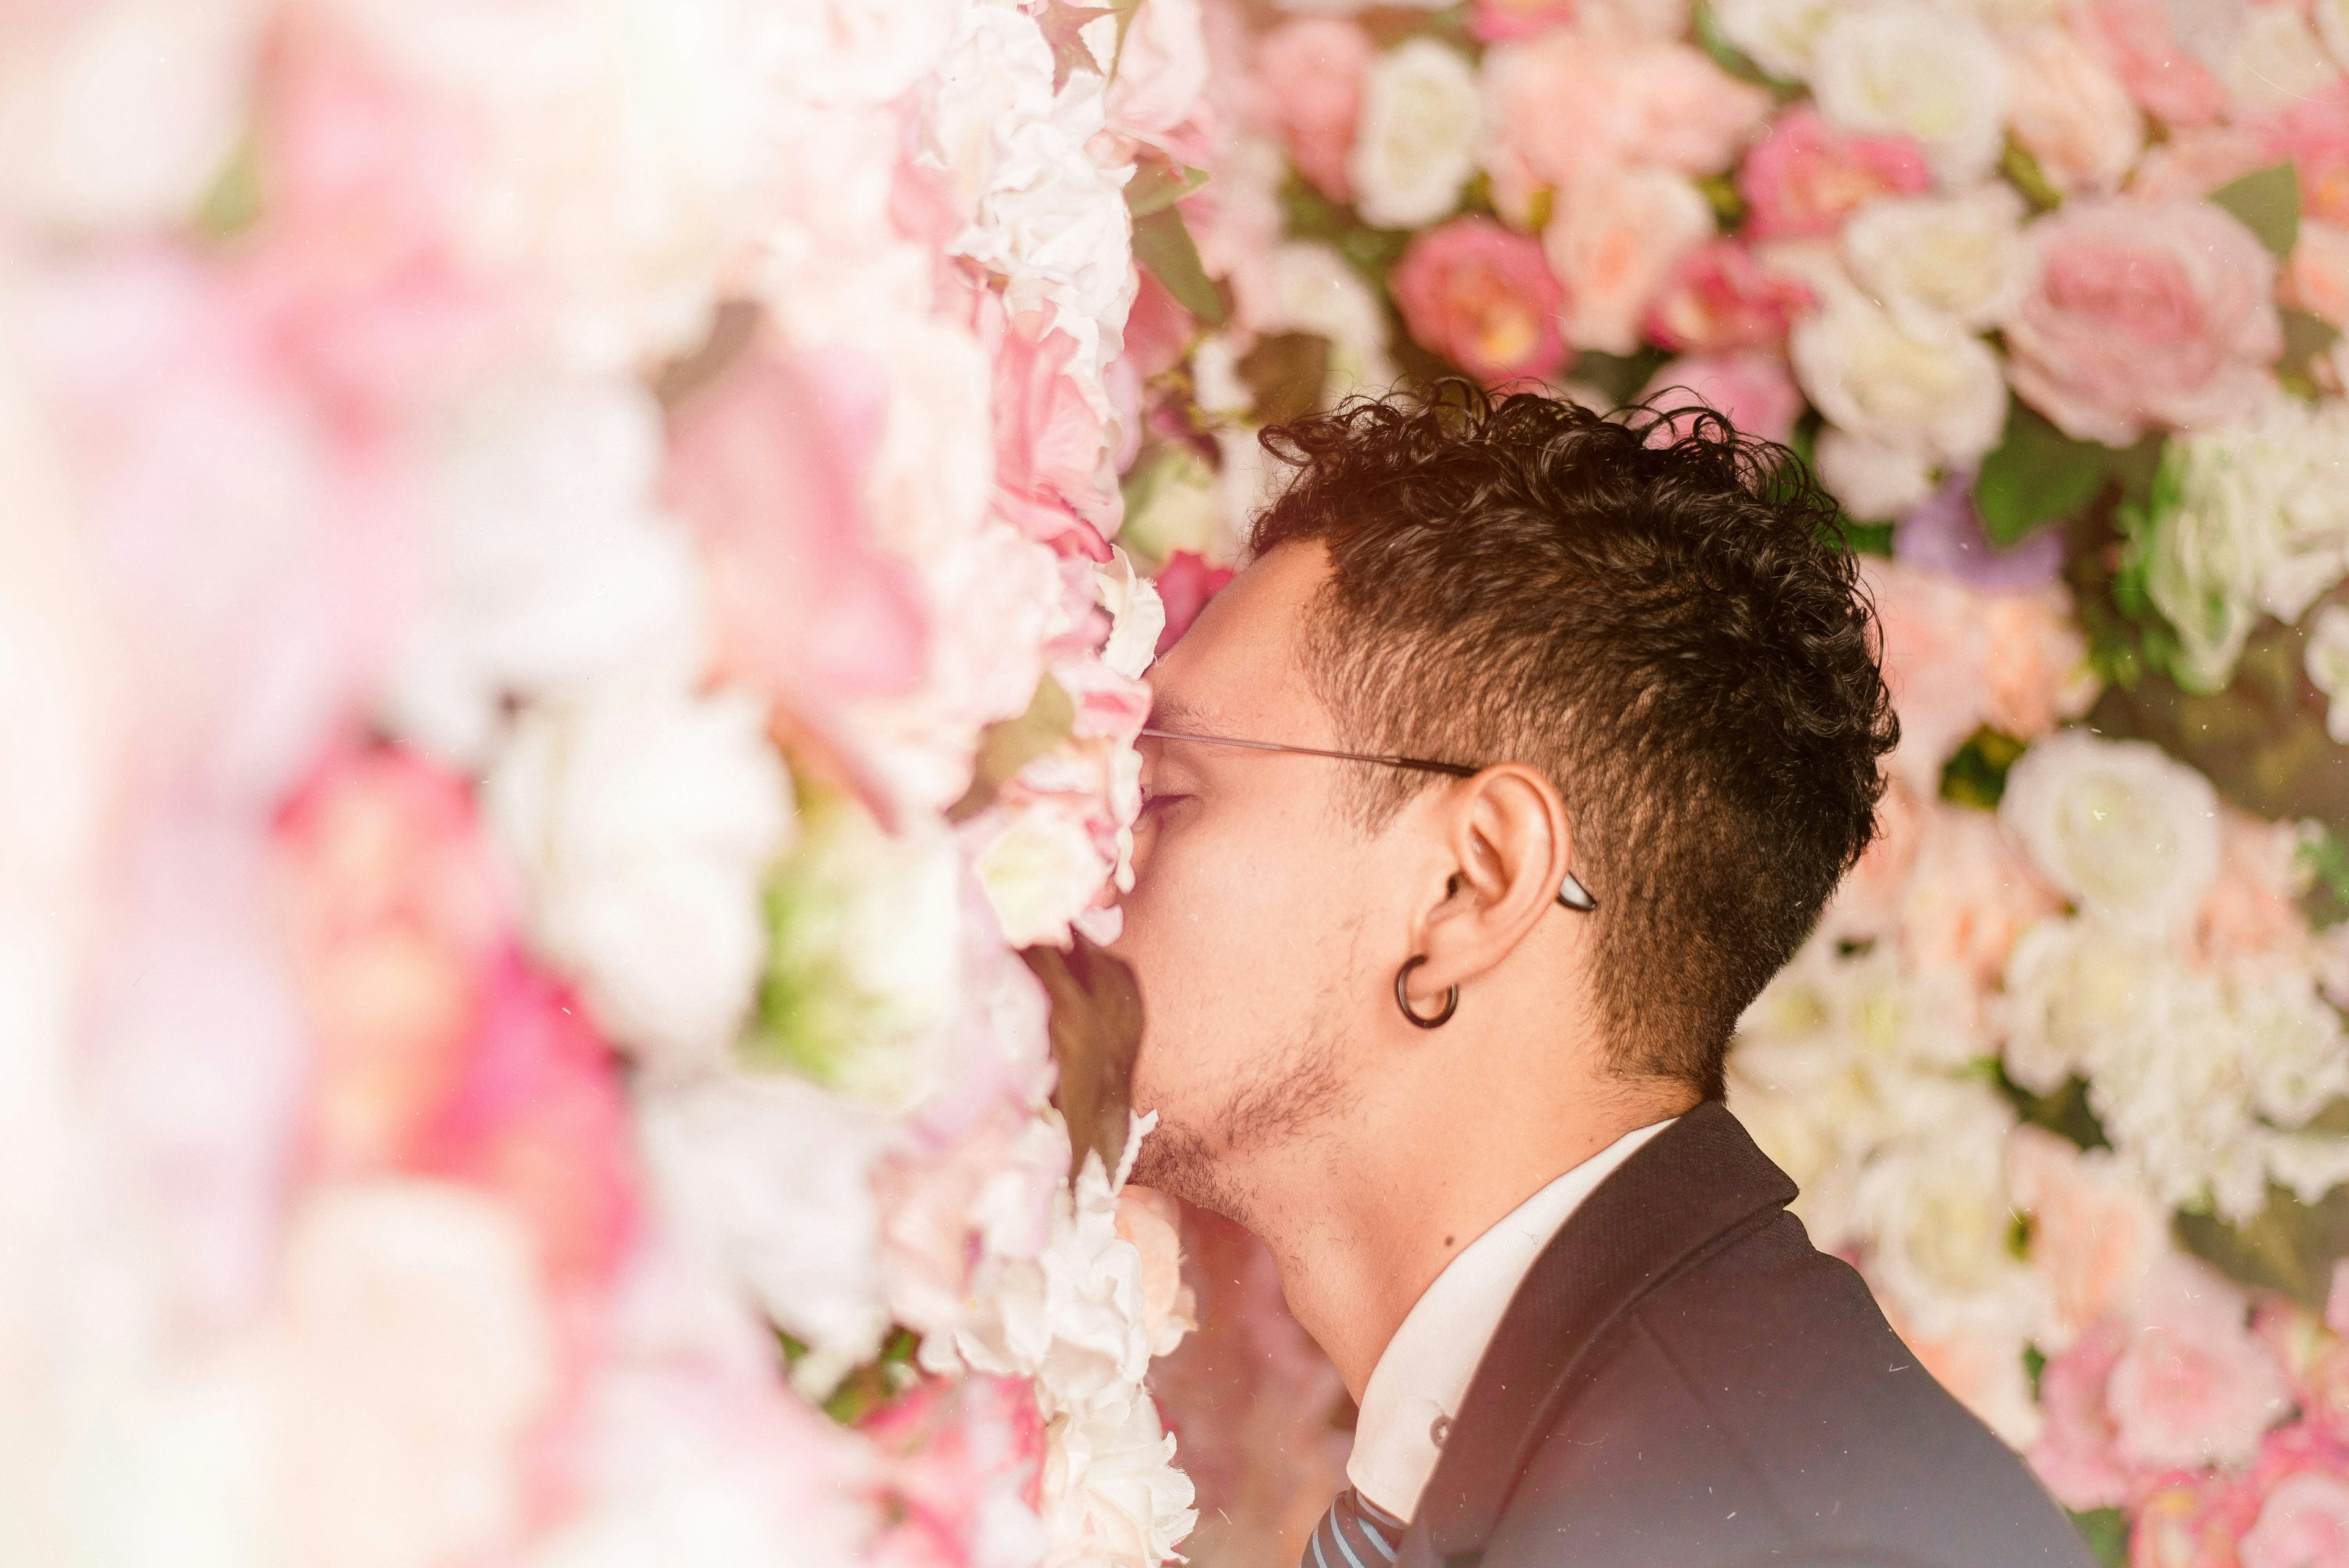 a person with his face pressed into a wall of flowers